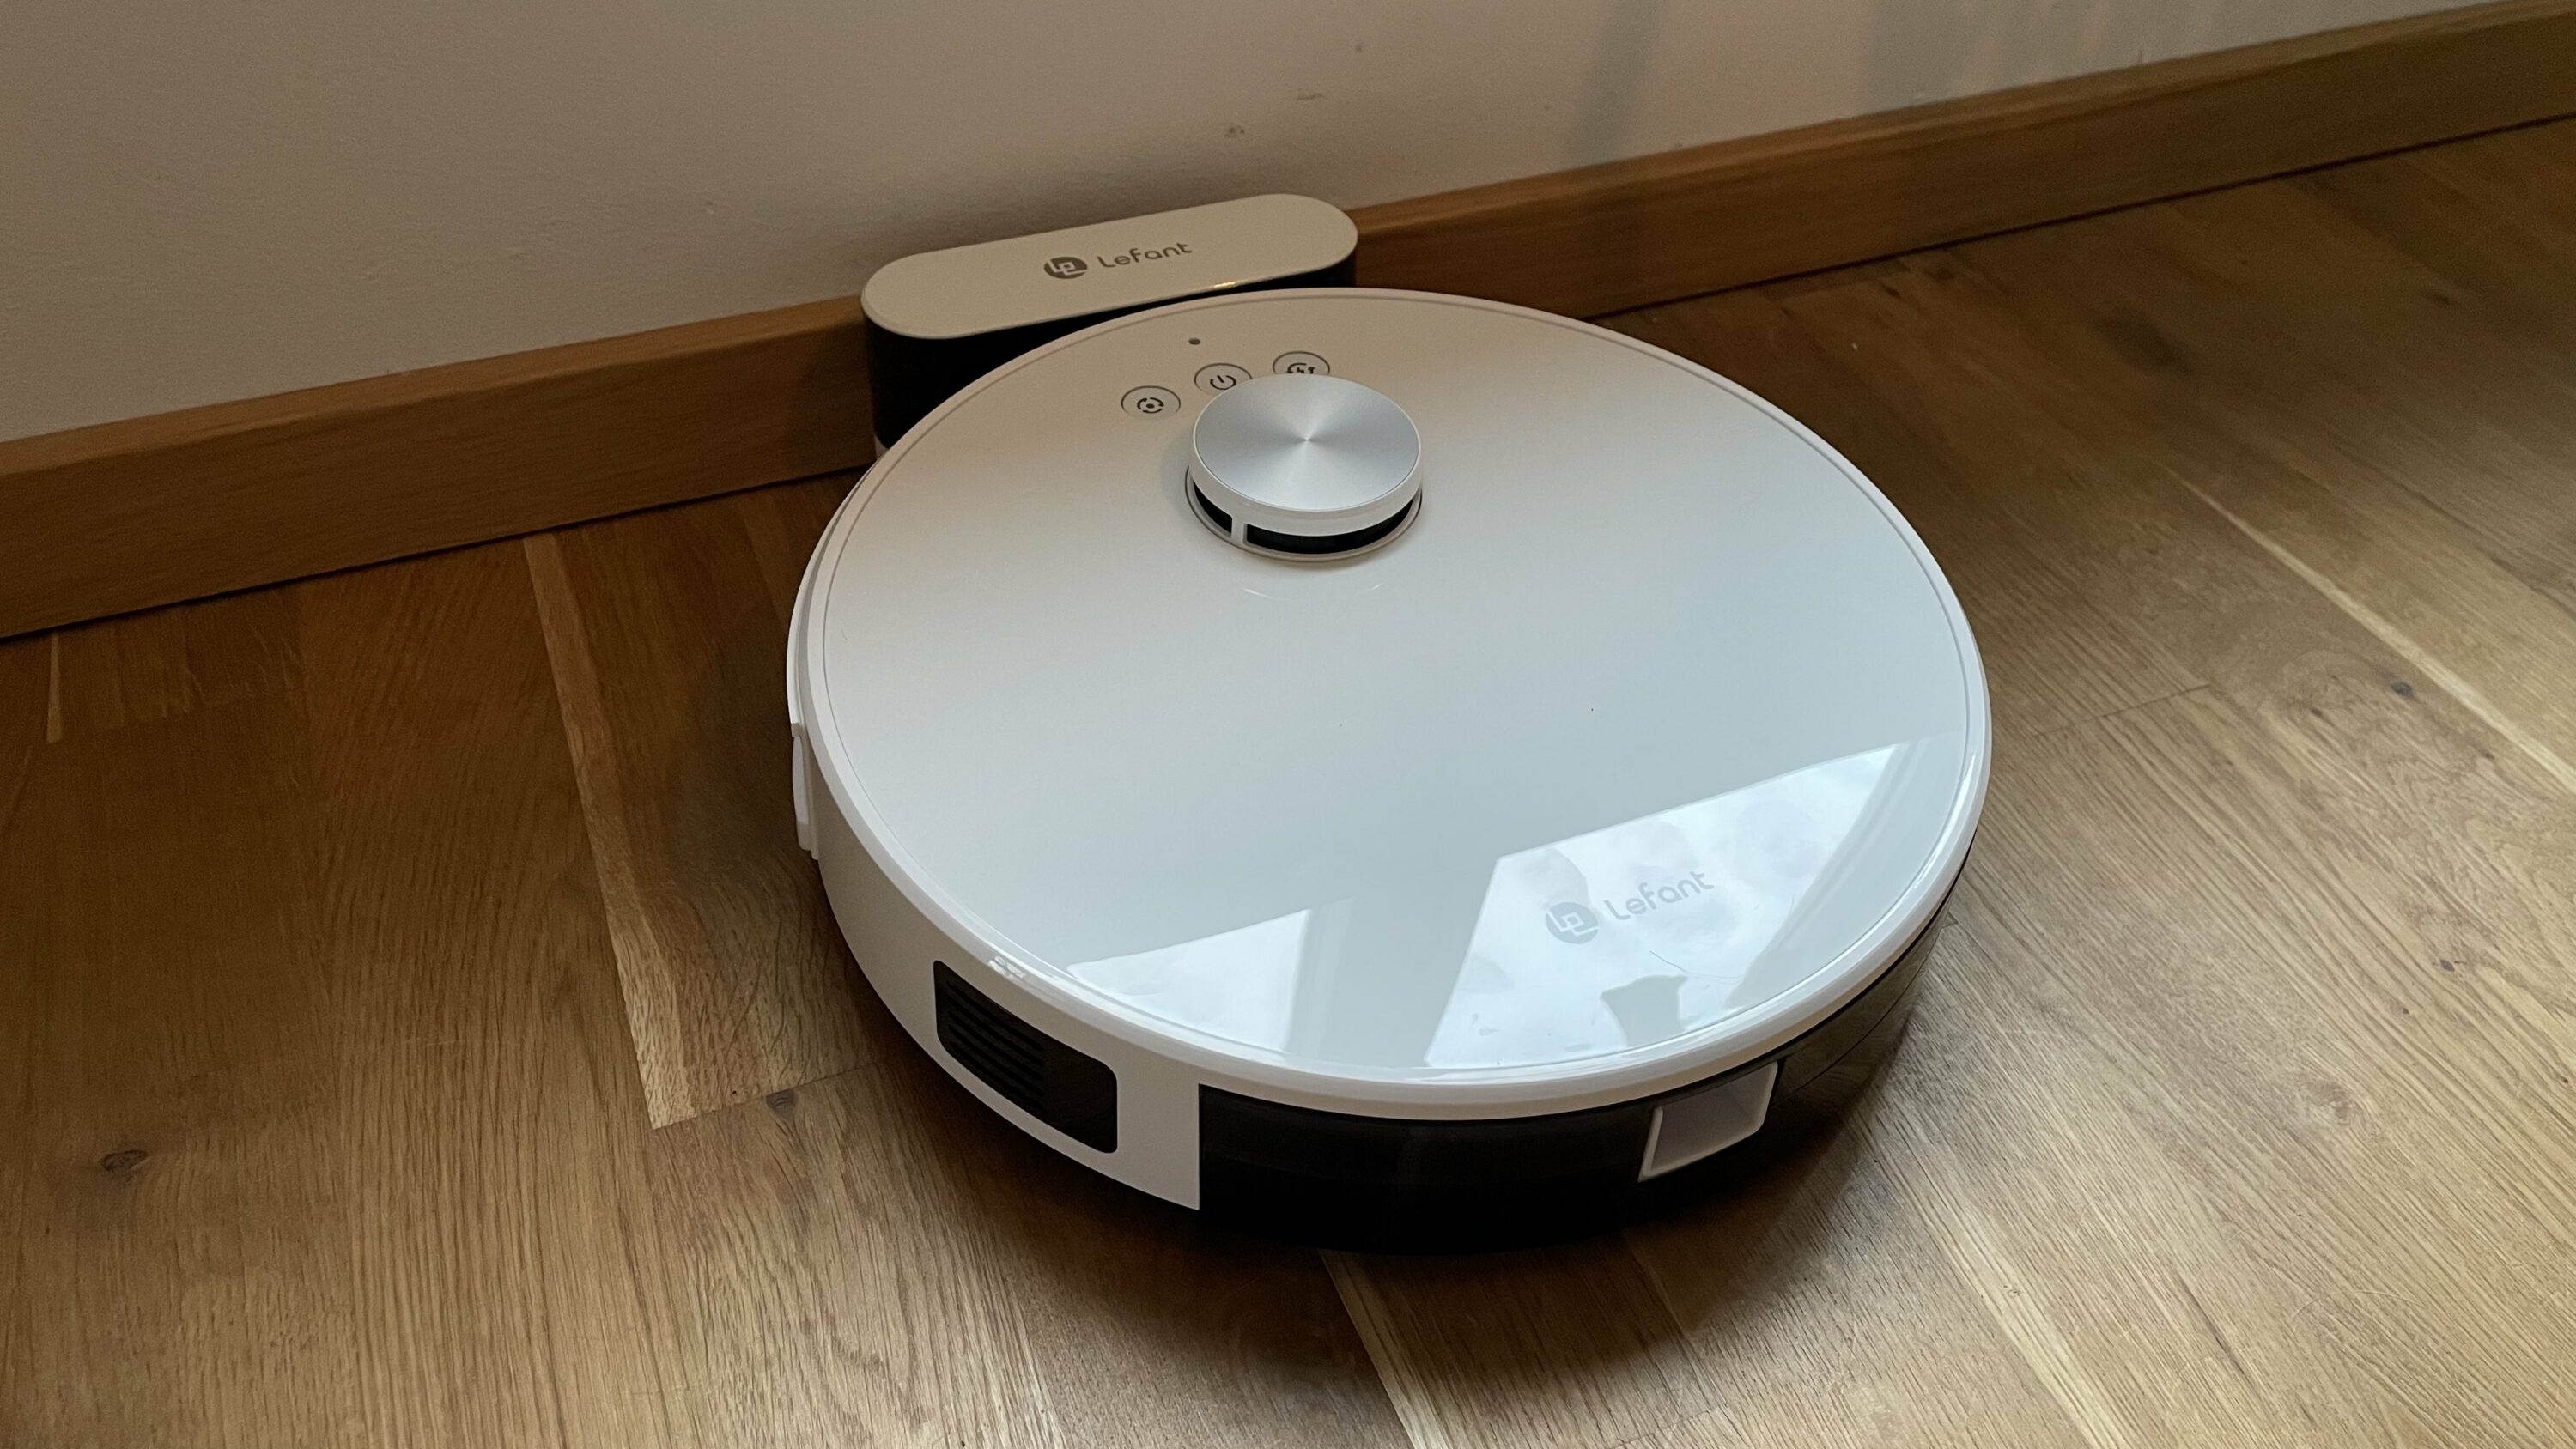 Lefant M1 robot vacuum cleaner: test / review (with 110€ coupon)